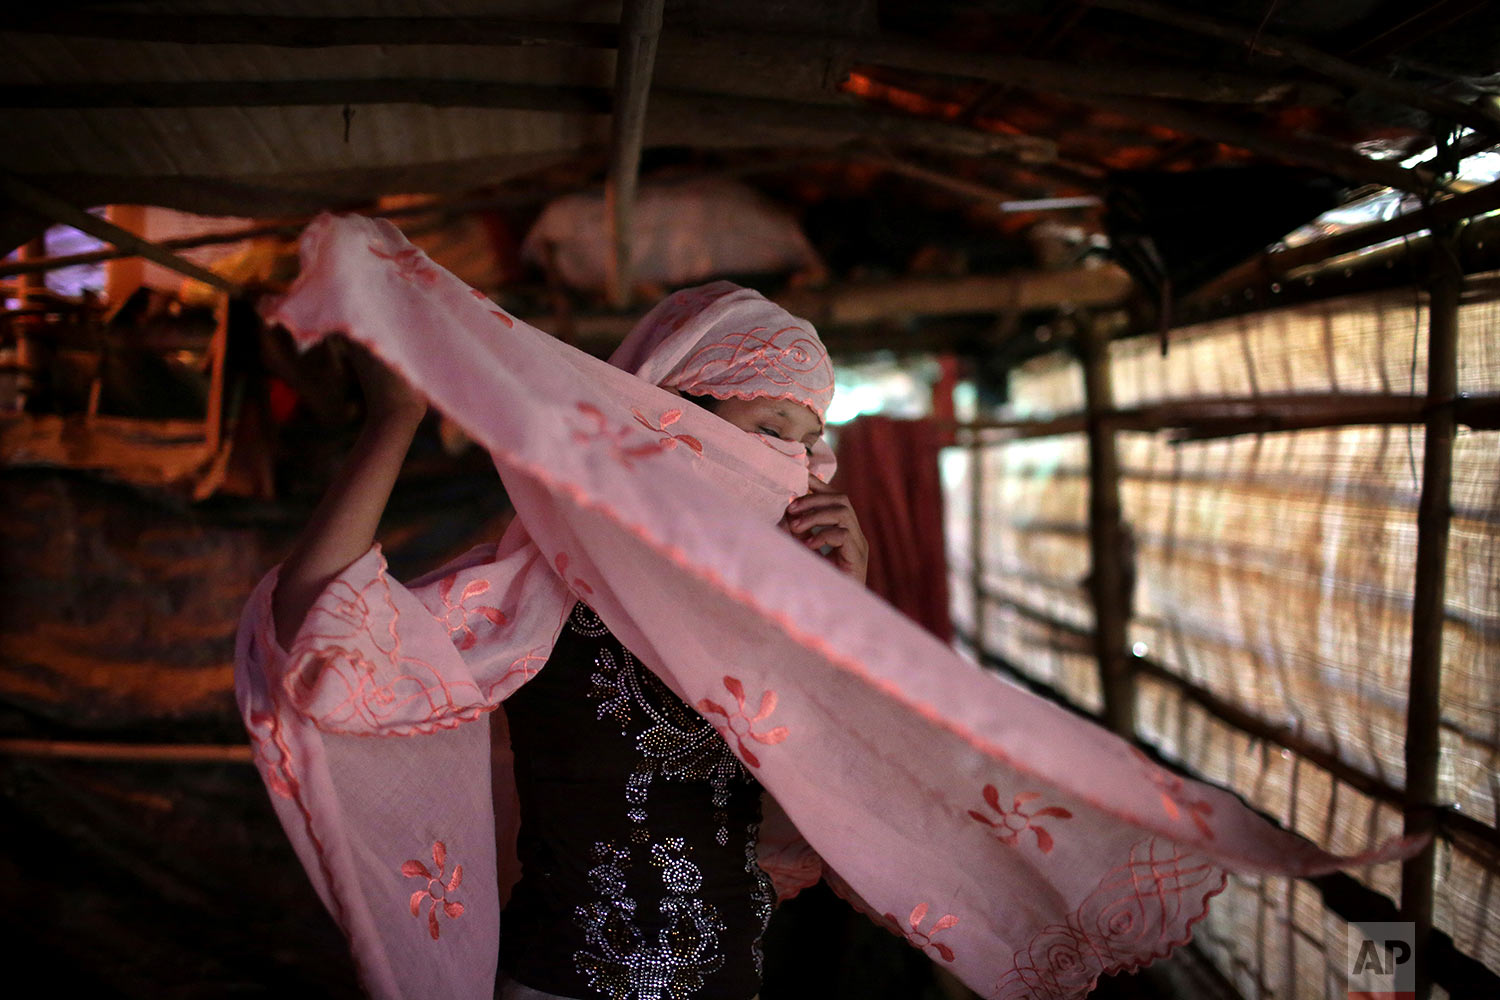   In this Sunday, Nov. 19, 2017, photo, R, 13, who says she was raped by members of Myanmar's armed forces in late August, adjusts her headscarf while photographed in her family's tent in Kutupalong refugee camp in Bangladesh. (AP Photo/Wong May